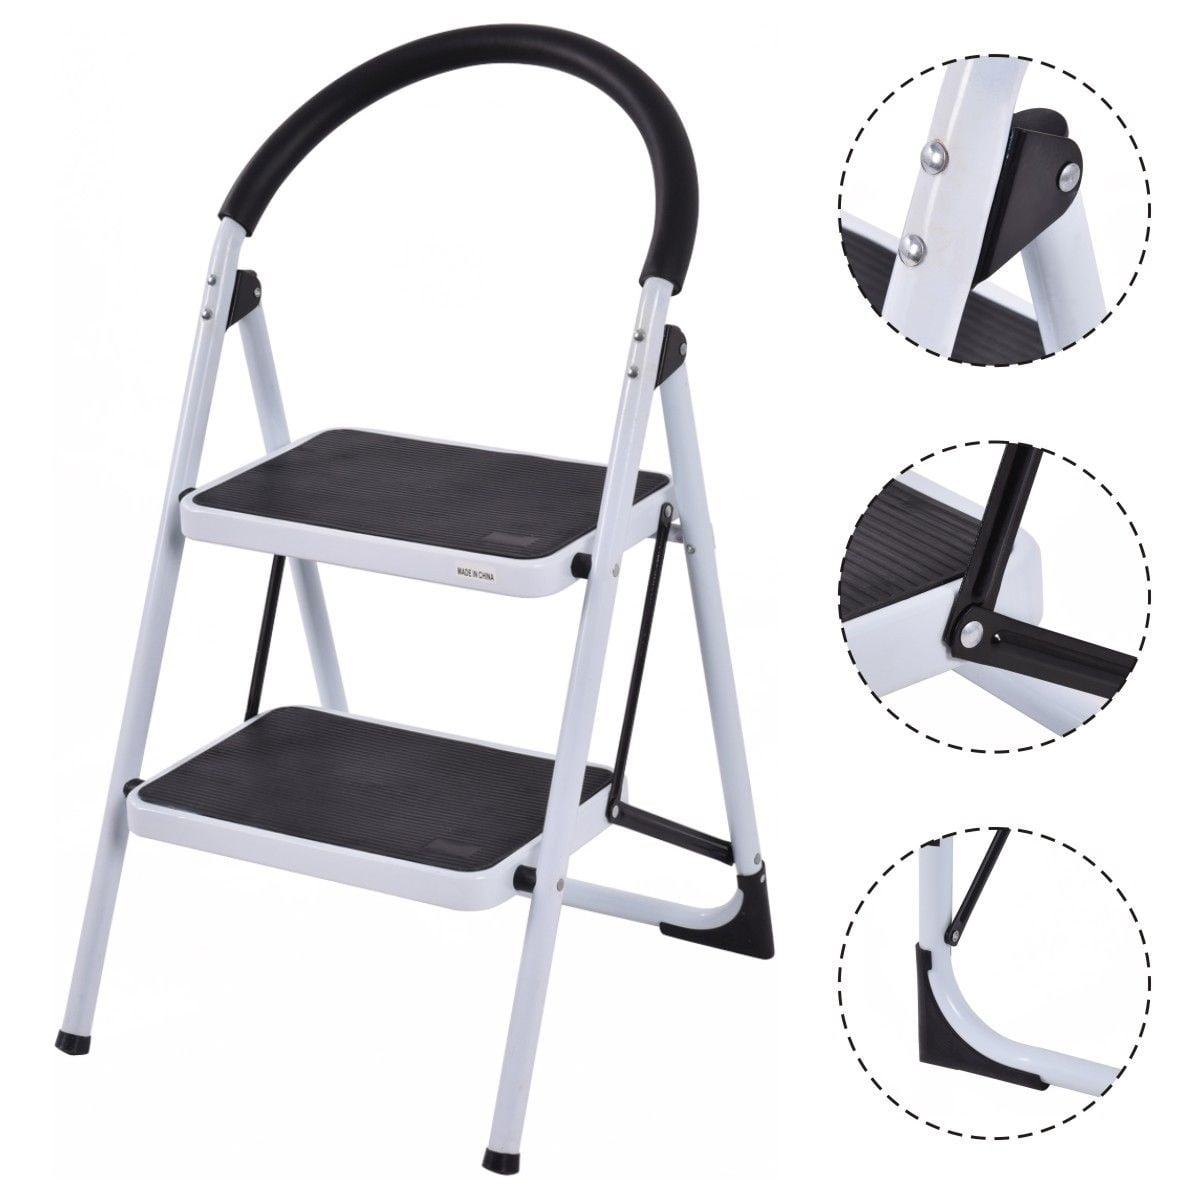 Foldable Step Stool Indoor/Outdoor Multi Purpose Heavy Duty Storage Seat White 